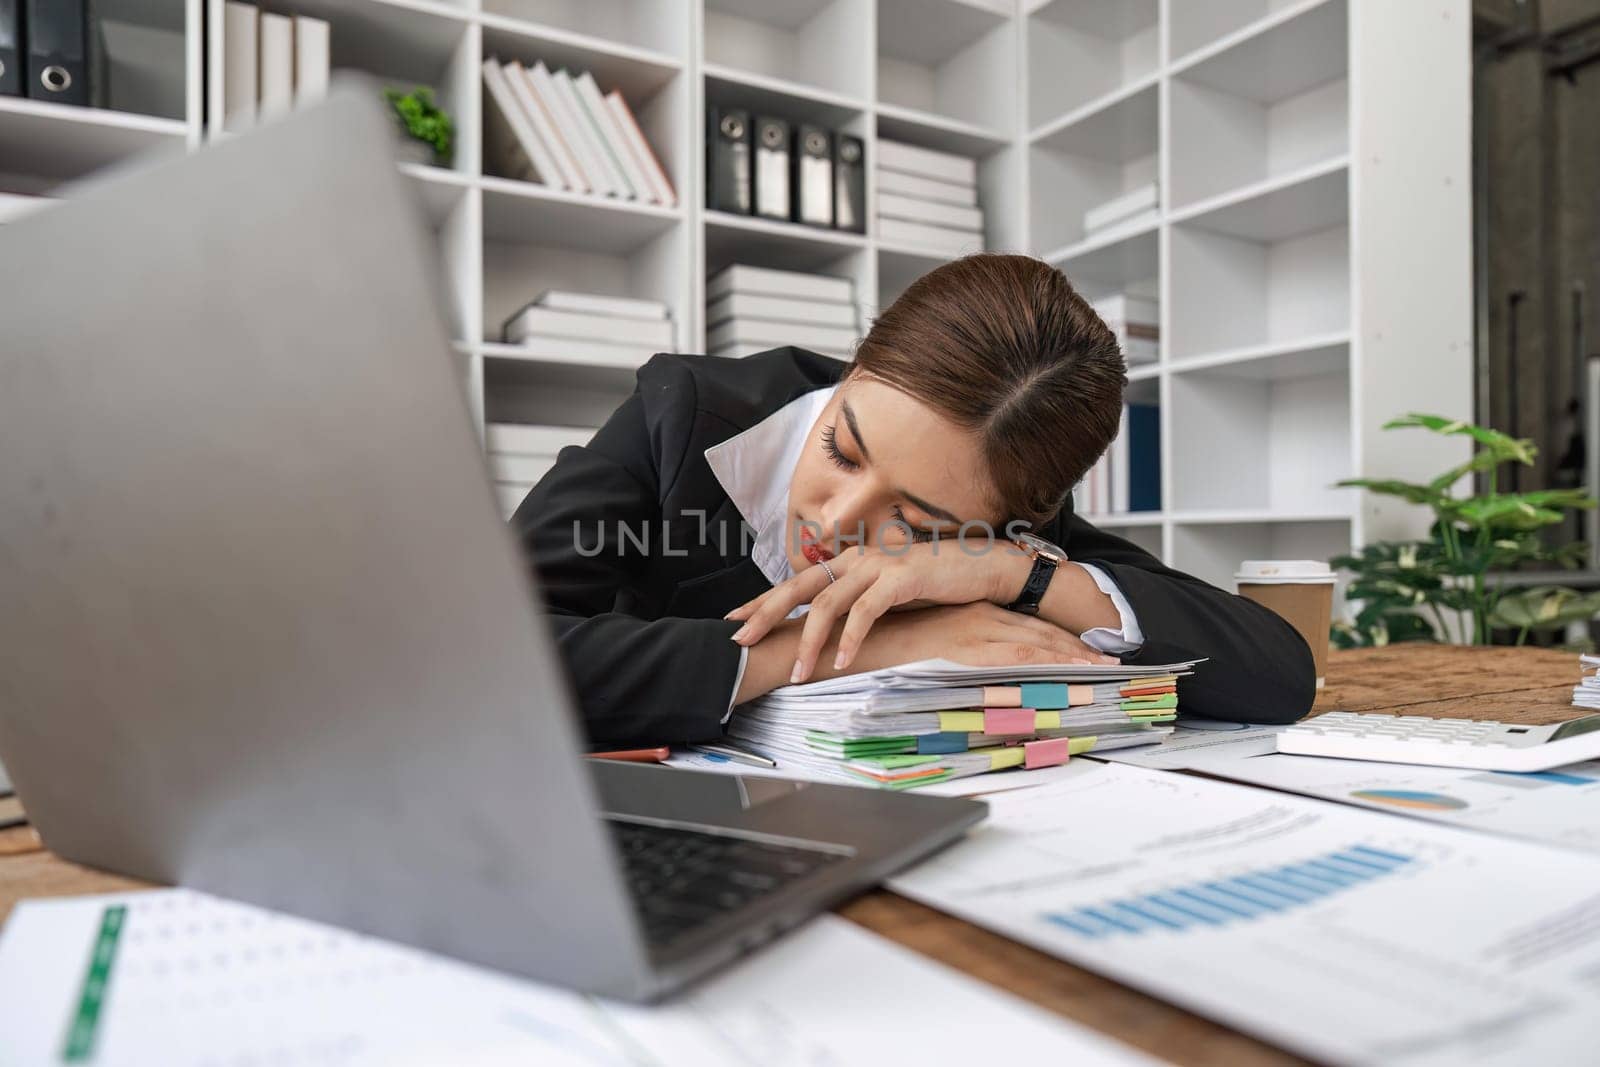 Tired or exhausted young business woman napping on working desk in front of her laptop in office.